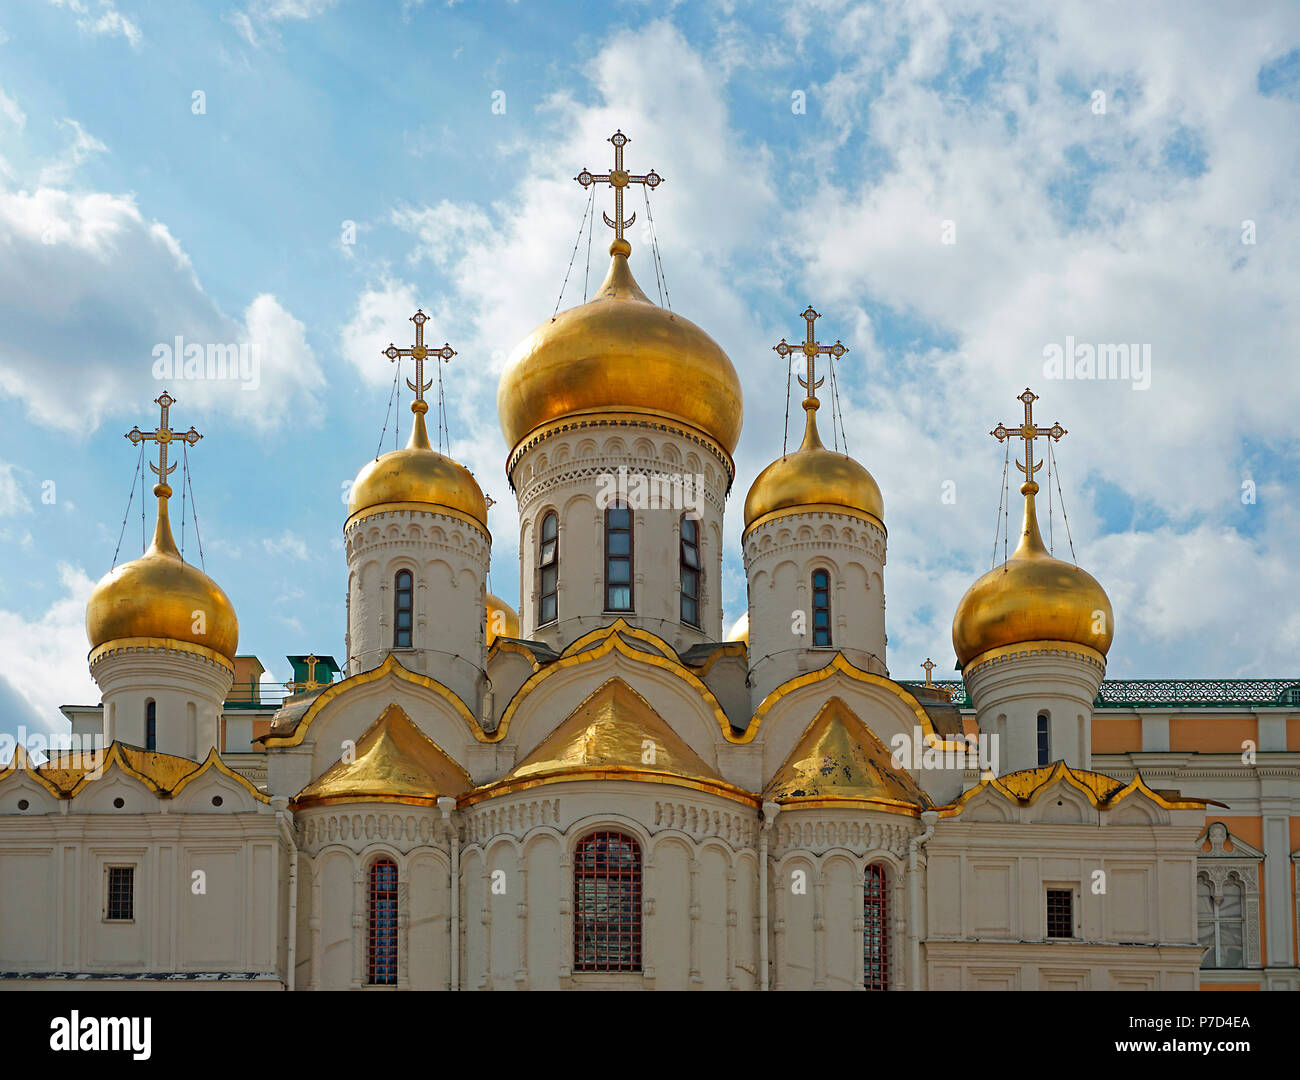 Domes of the Cathedral of the Annunciation, Kremlin, Moscow, Russia Stock Photo